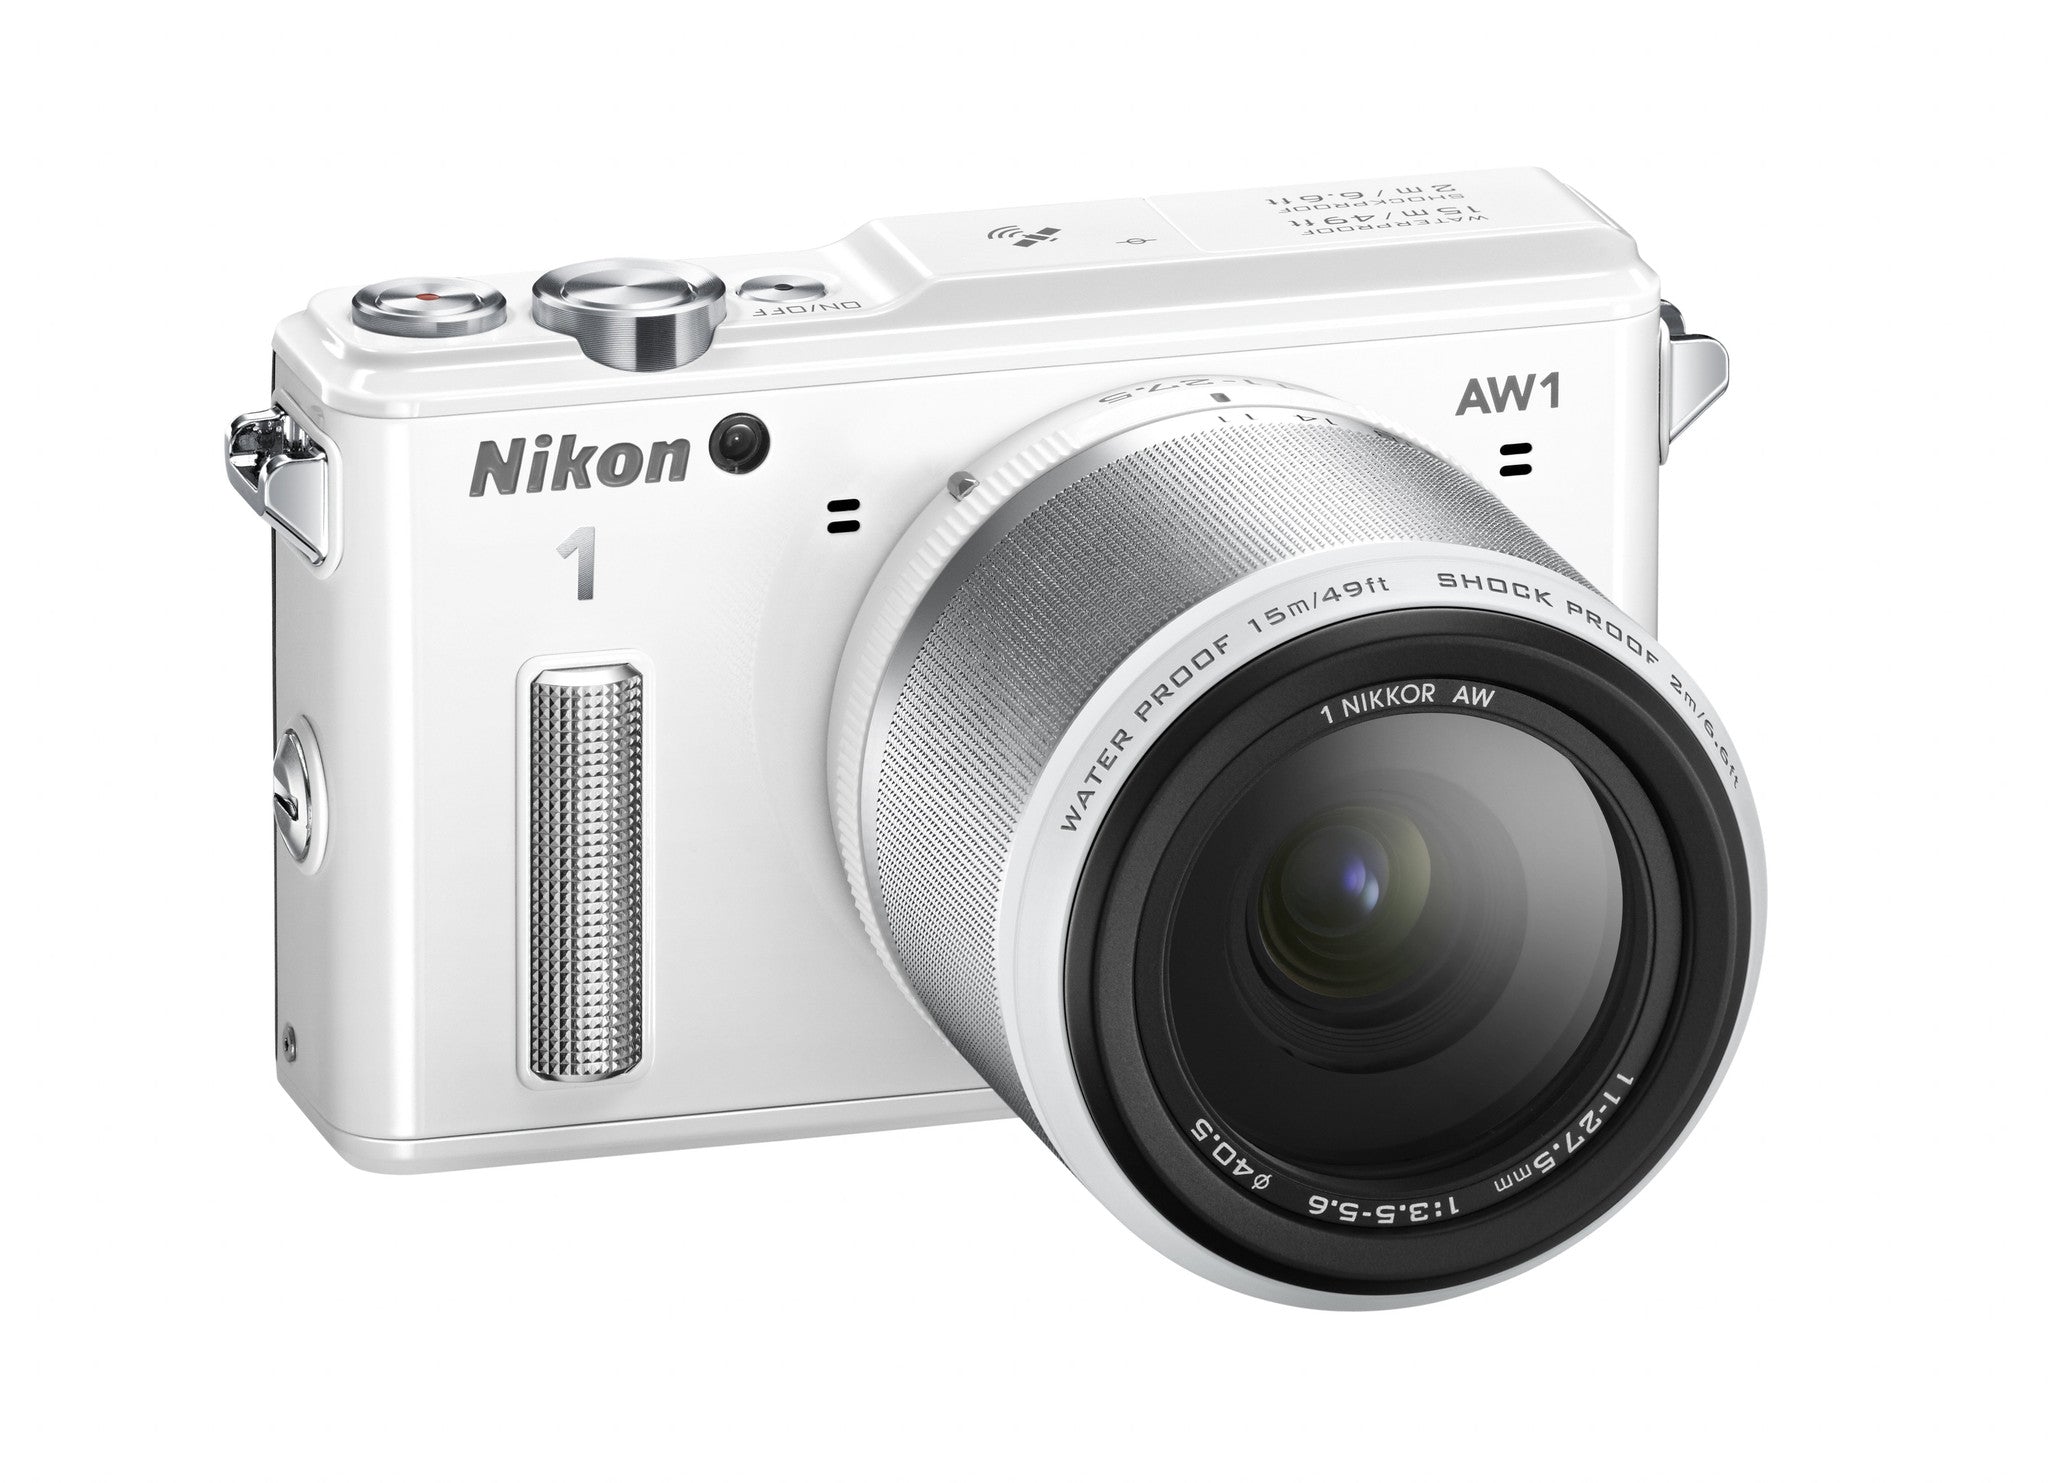 Nikon 1 AW1 Waterproof Digital Camera with AW 11-27.5mm Lens (White), discontinued, Nikon - Pictureline  - 5